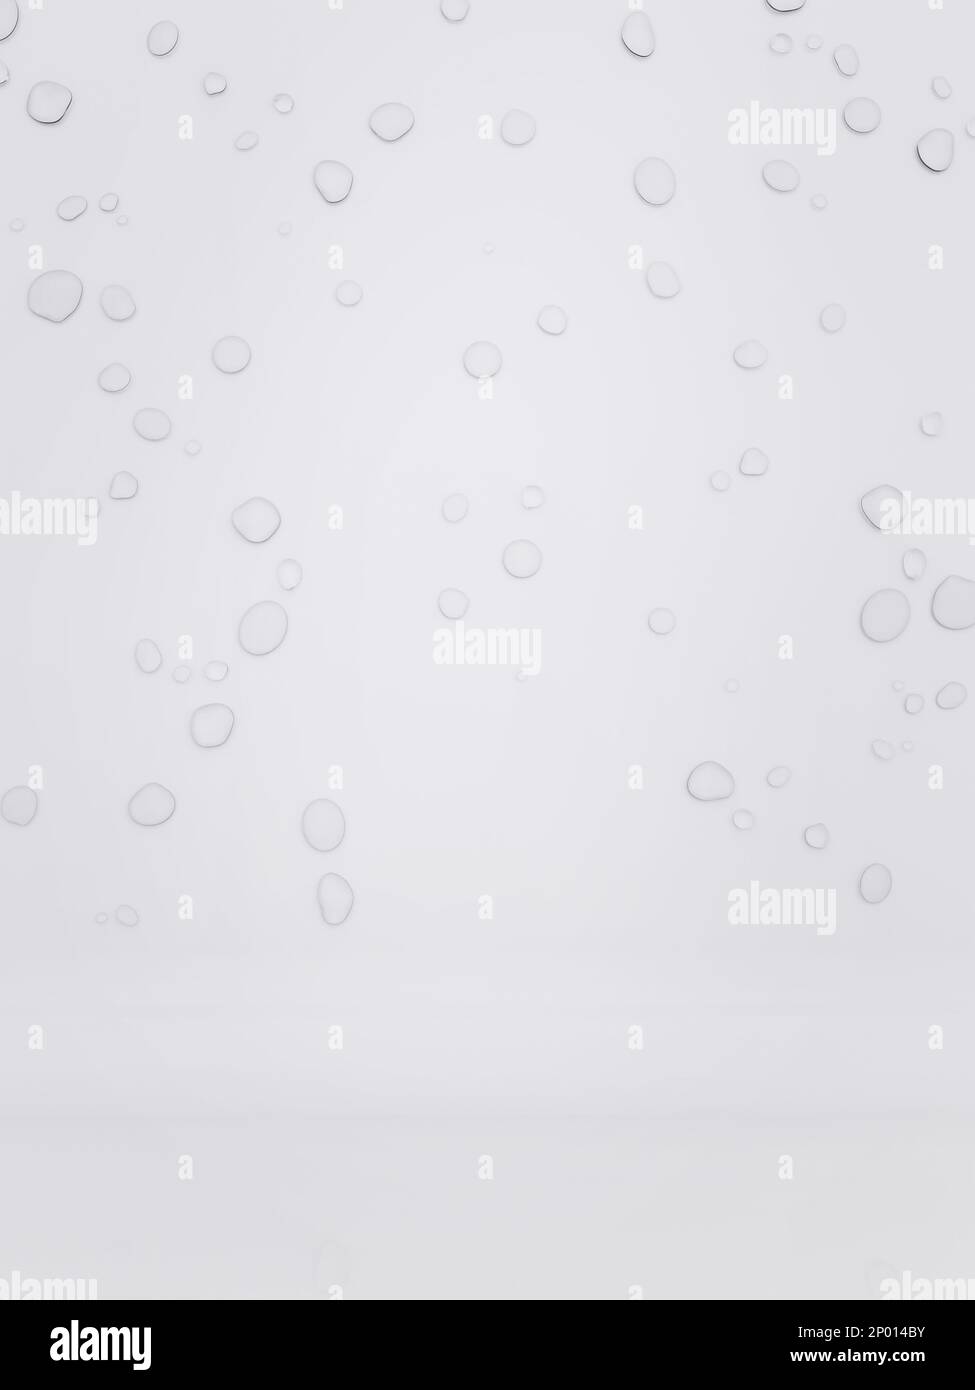 3D Rendering Studio Shot Pure White Waterdrops Background for Beauty, Skin Care, food and Beverage Advertising Product Display. Stock Photo